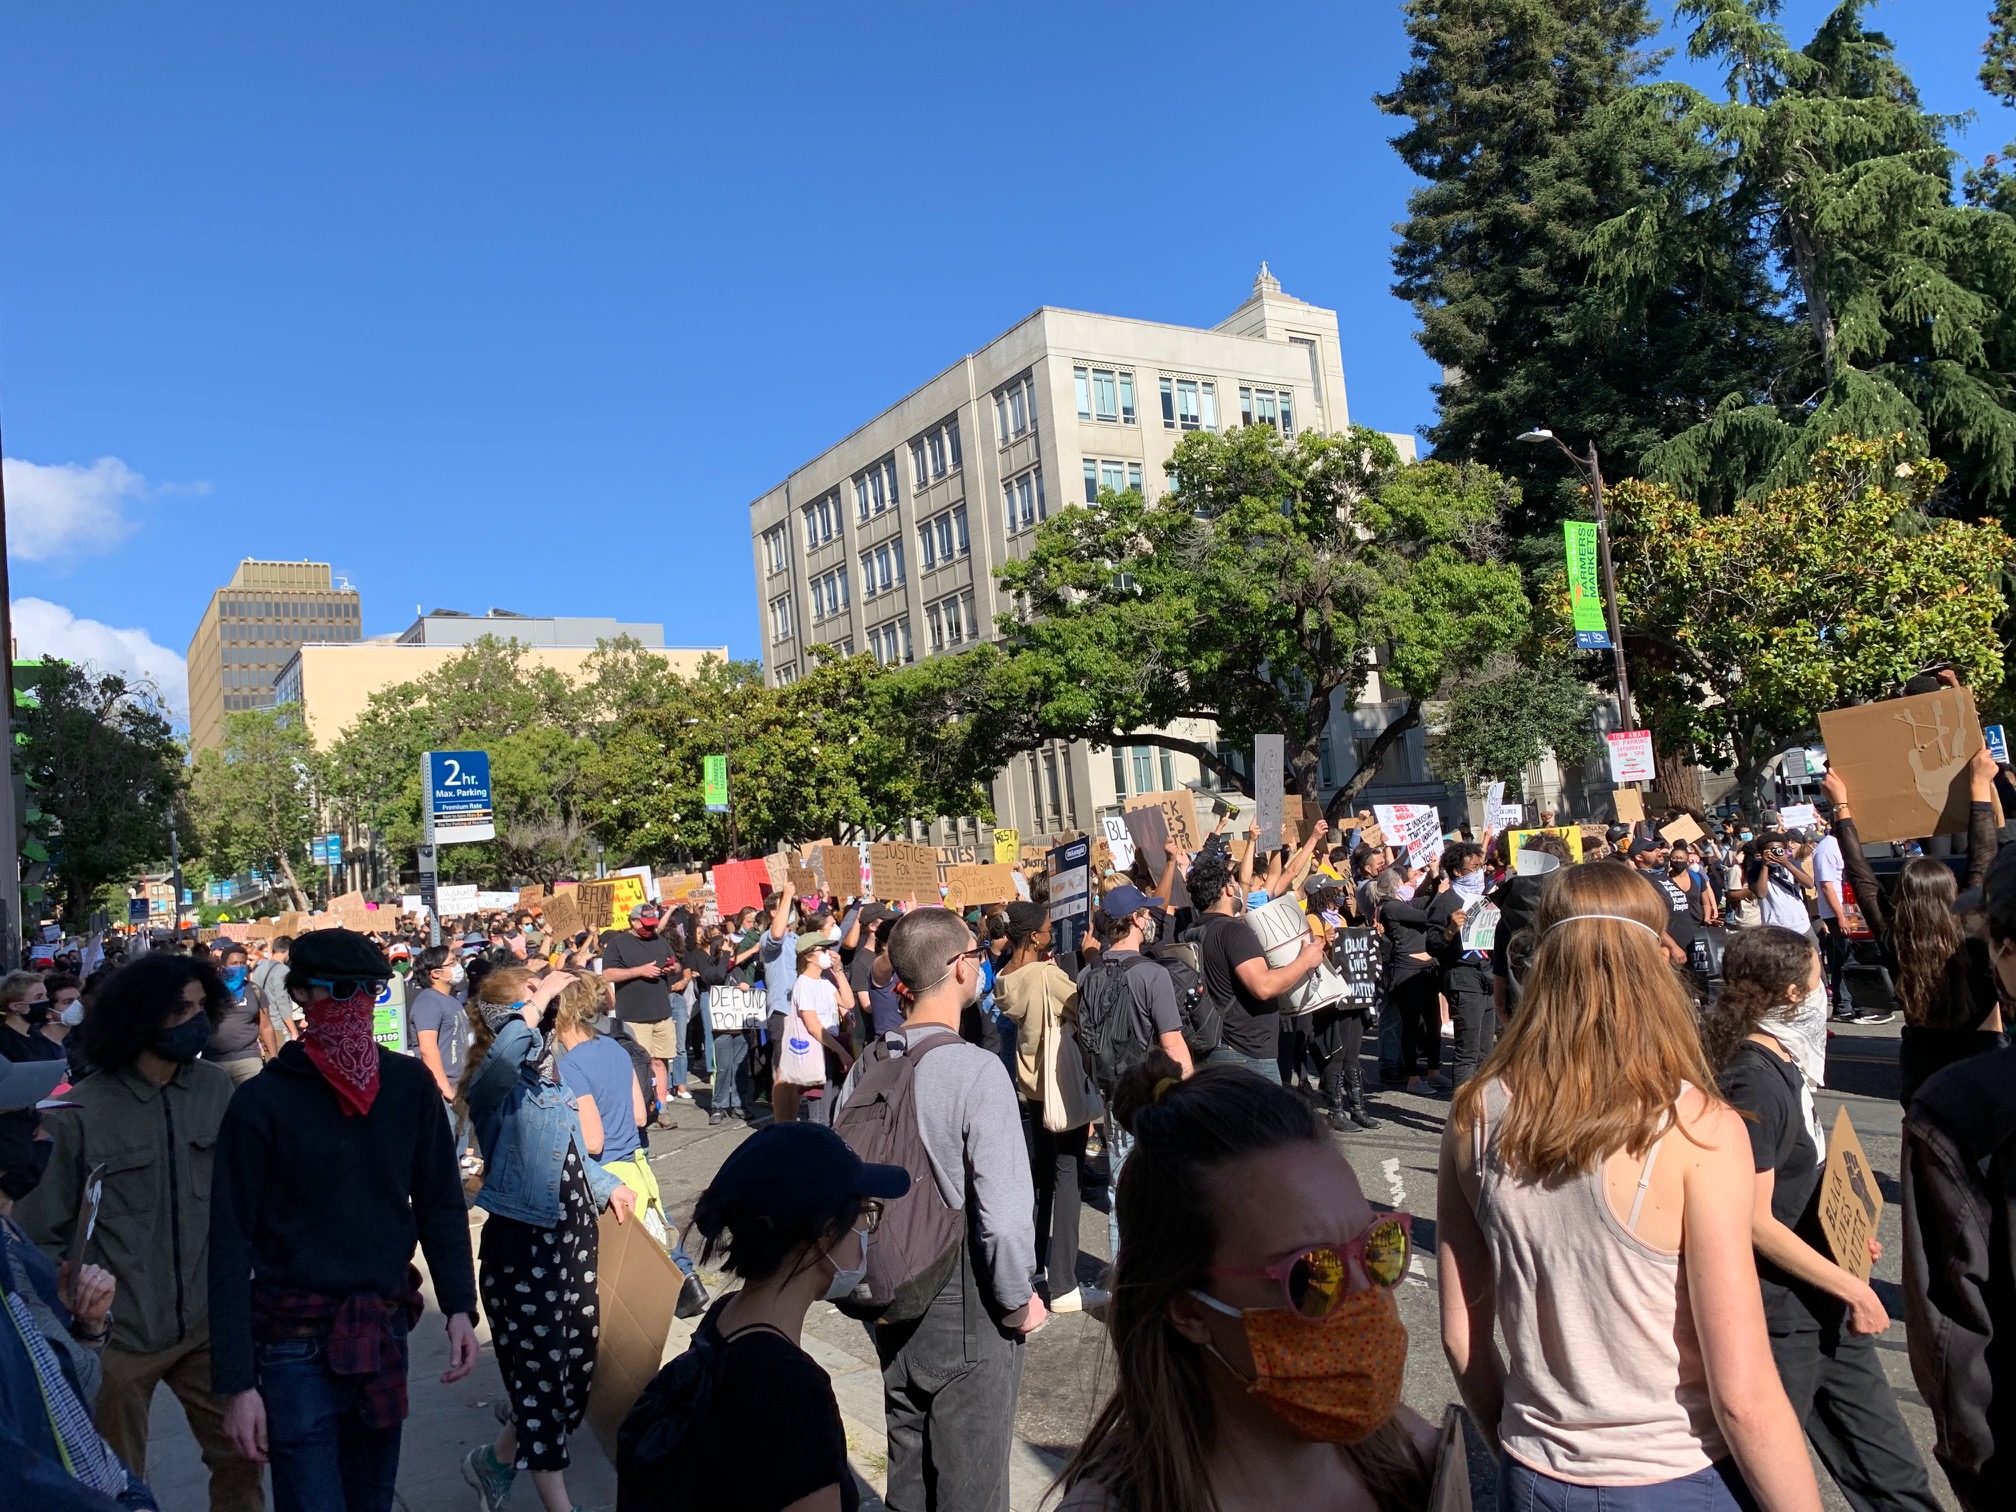 Image from a Black Lives Matter Protest in Berkeley, California